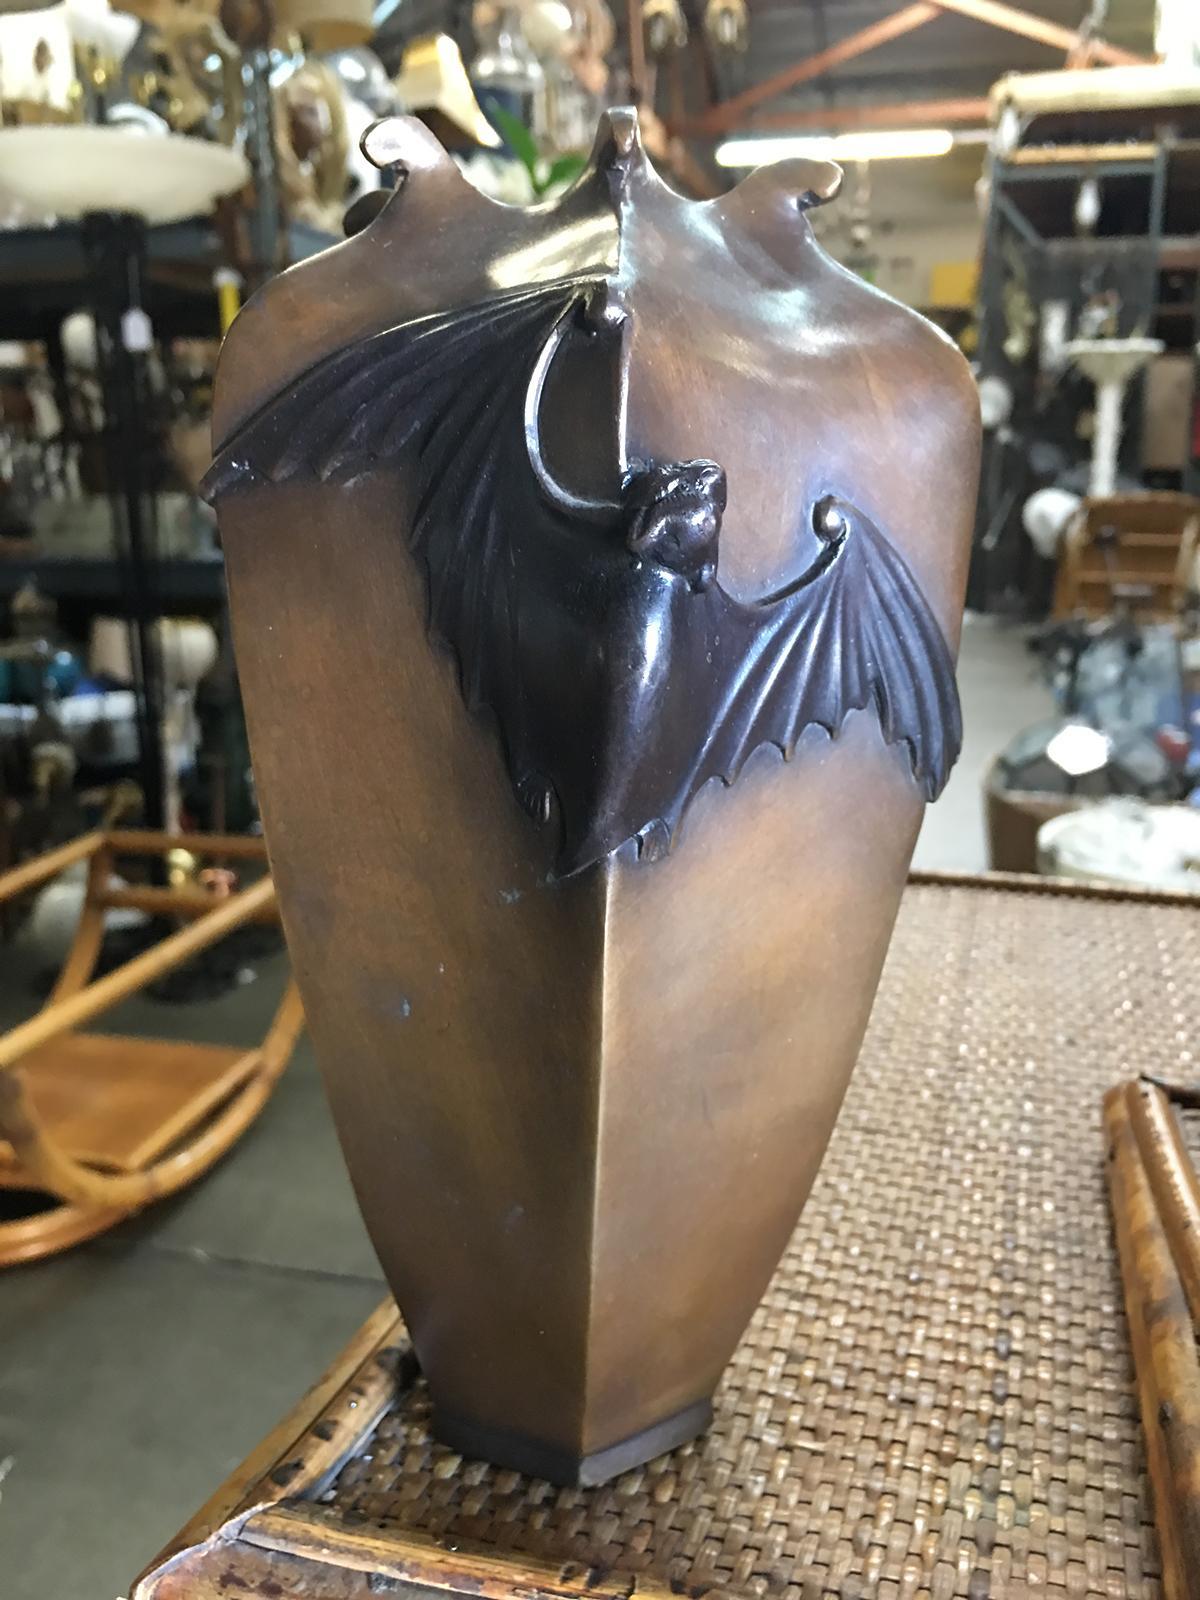 Casting from an original antique Japanese vase that was made in 1890 this solid bronze vase is finished in an antique patina. The six-sided, tapered design with rolled tips at the opening features a bat spreads across two sides with an Art Nouveau